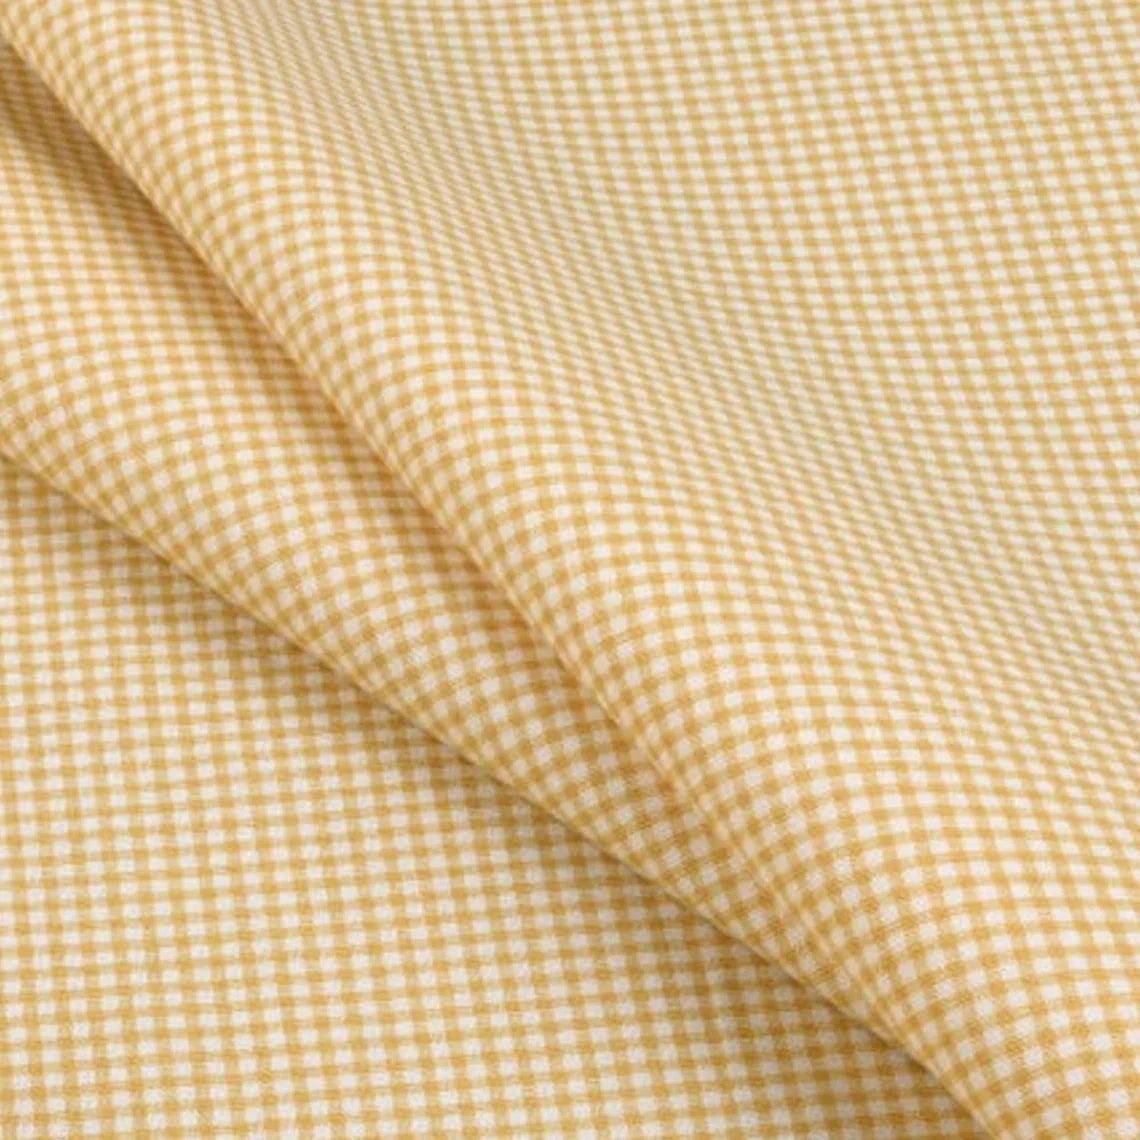 Pinch Pleated Curtain Panels Pair in Farmhouse Barley Yellow Gold Gingham Check